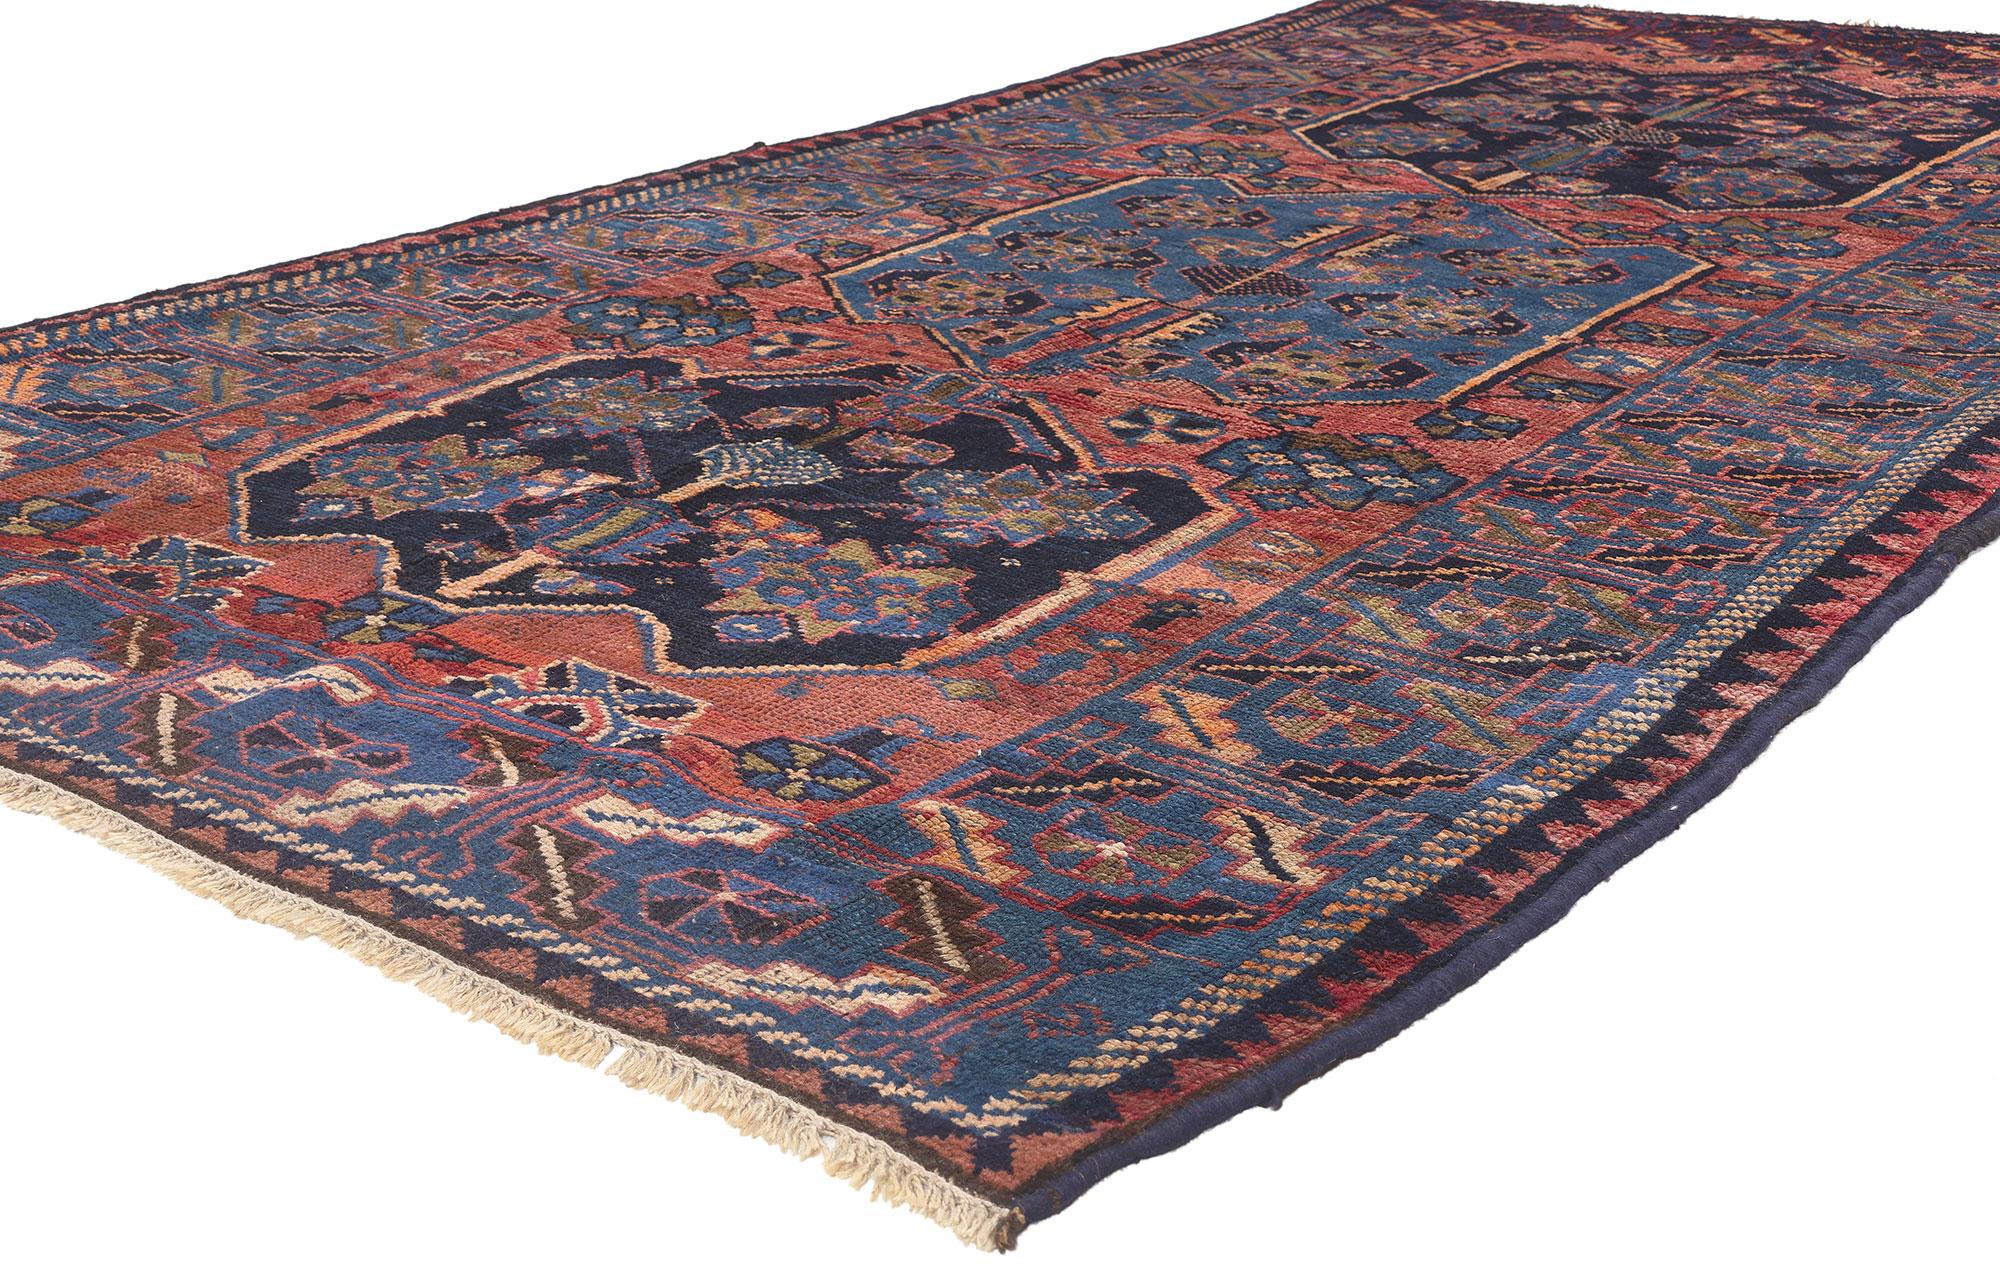 61243 Antique Persian Shiraz Rug, 04'09 x 08'11.
Emanating Qashqai Tribe influence with incredible detail and texture, this hand knotted wool antique Persian Shiraz rug is a captivating vision of woven beauty. The intricate tribal design and